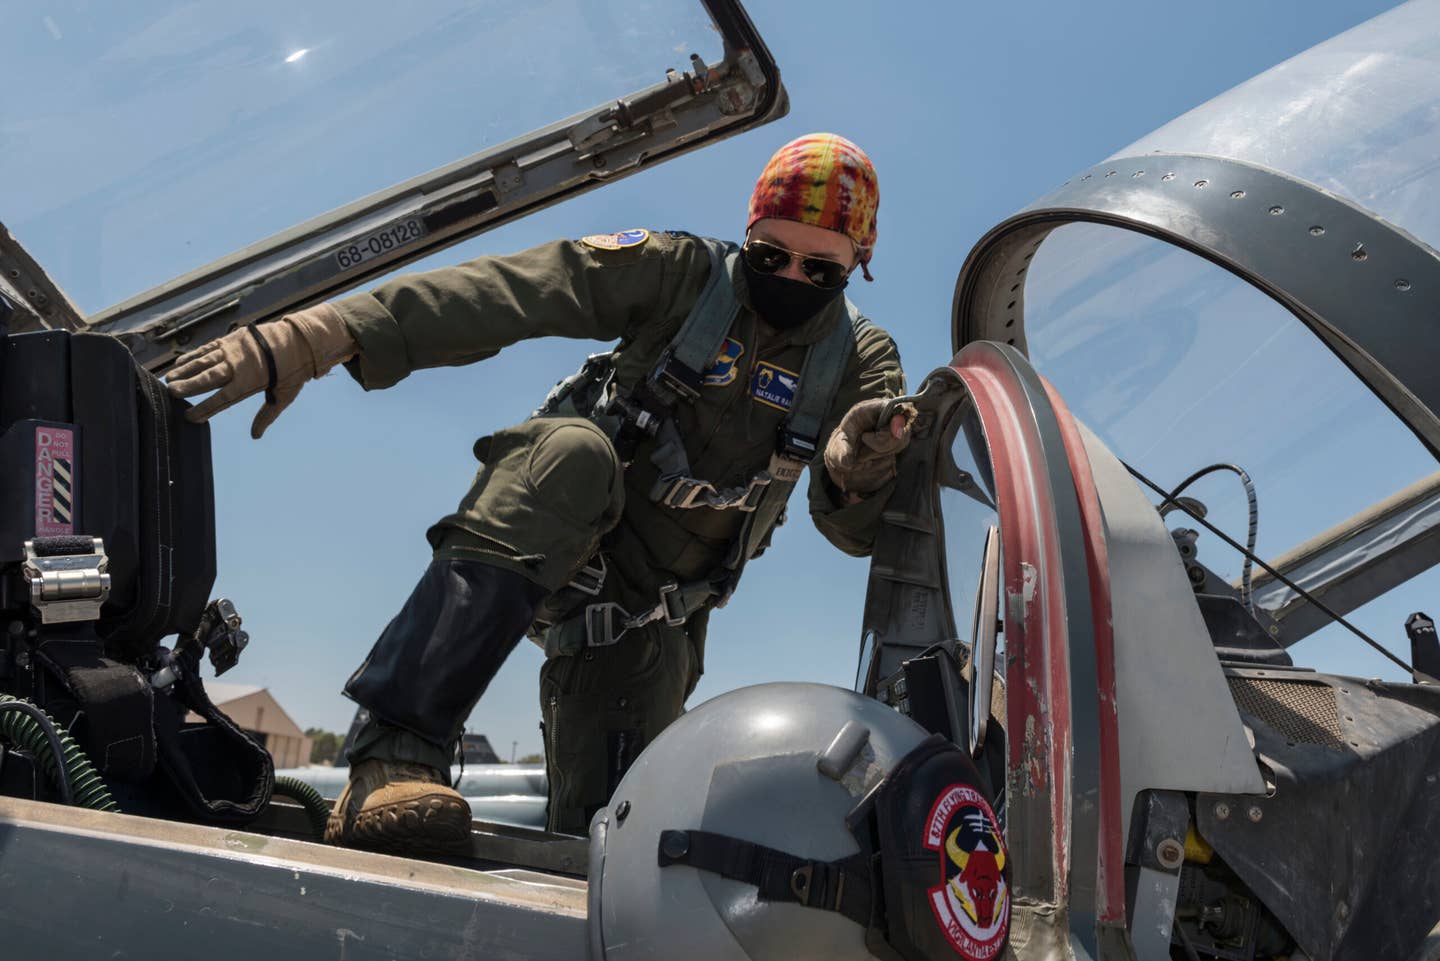 Capt. Natalie Rambish, 47th Operations Support Squadron aircrew and flight equipment commander and instructor pilot, climbs into her seat in a T-38C Talon as she prepares to fly with a student pilot at Laughlin Air Force Base, Texas. <em>U.S. Air Force photo by Senior Airman Anne McCready</em><br><a href="https://www.laughlin.af.mil/News/Display/Article/2317955/female-aviators-at-laughlin-bond-through-mentorship-group/undefined"></a>